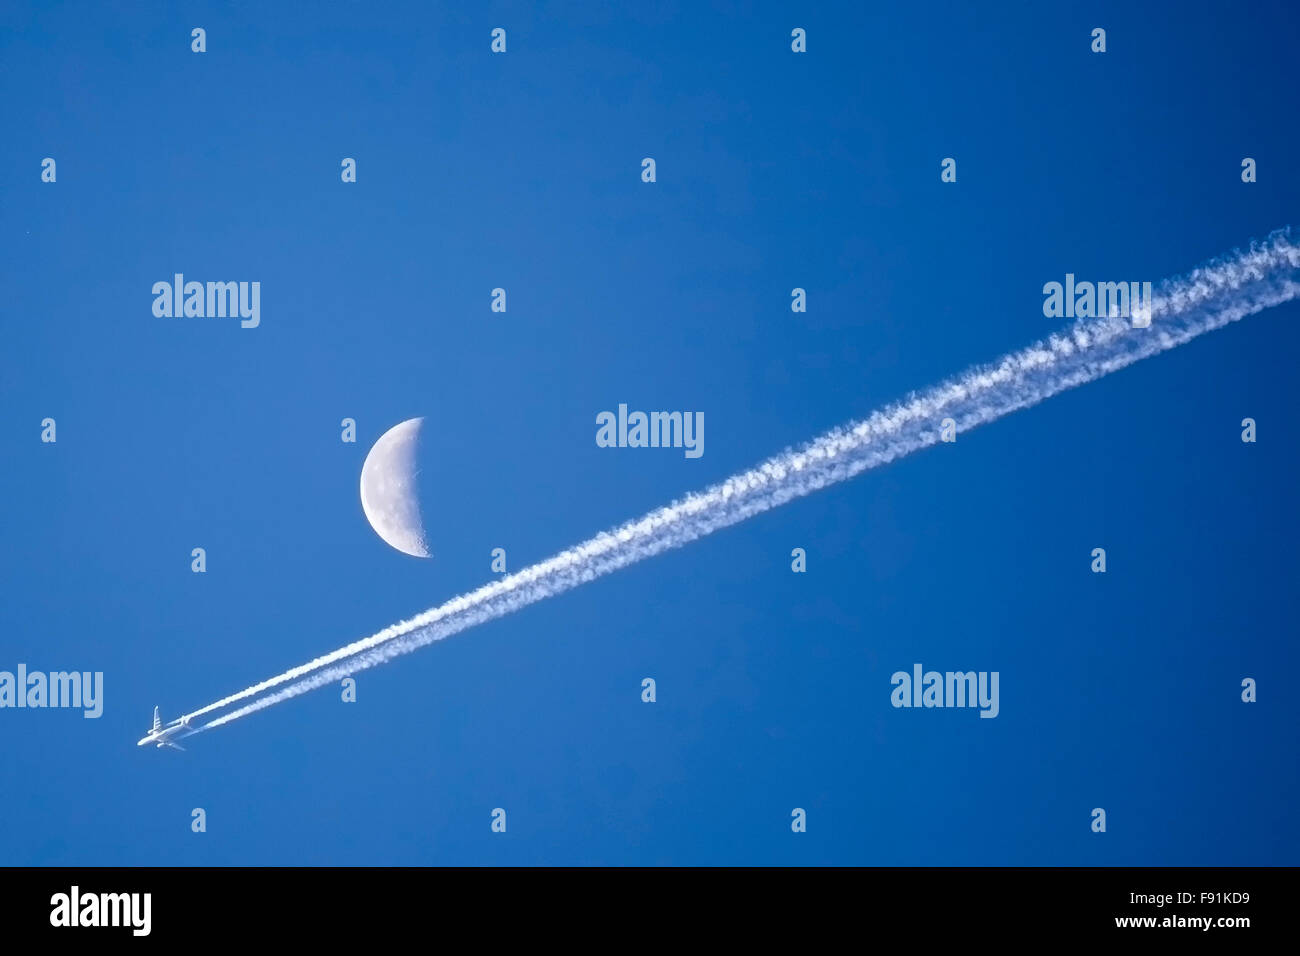 Airplane Flying Past The Moon Against Bright Blue Sky Stock Photo